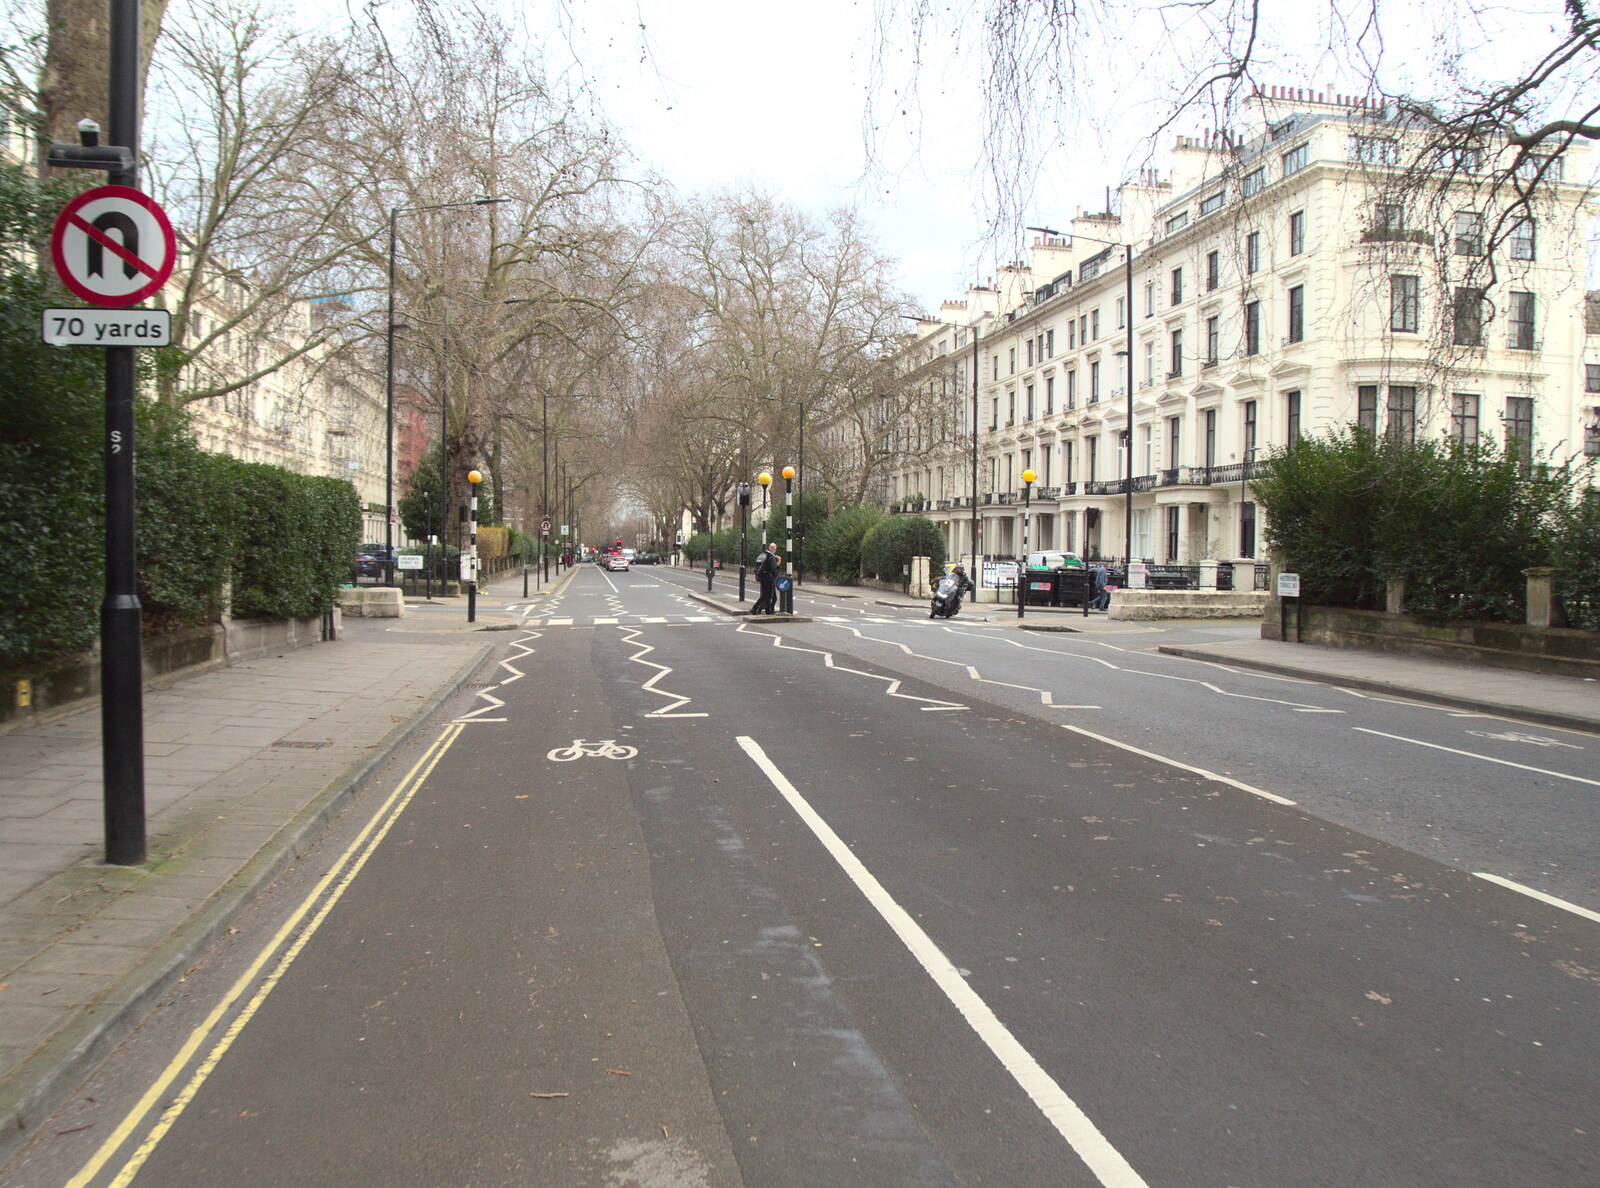 Cycling up Westbourne Terrace from The Last Trip to the SwiftKey Office, Paddington, London - 23rd February 2022